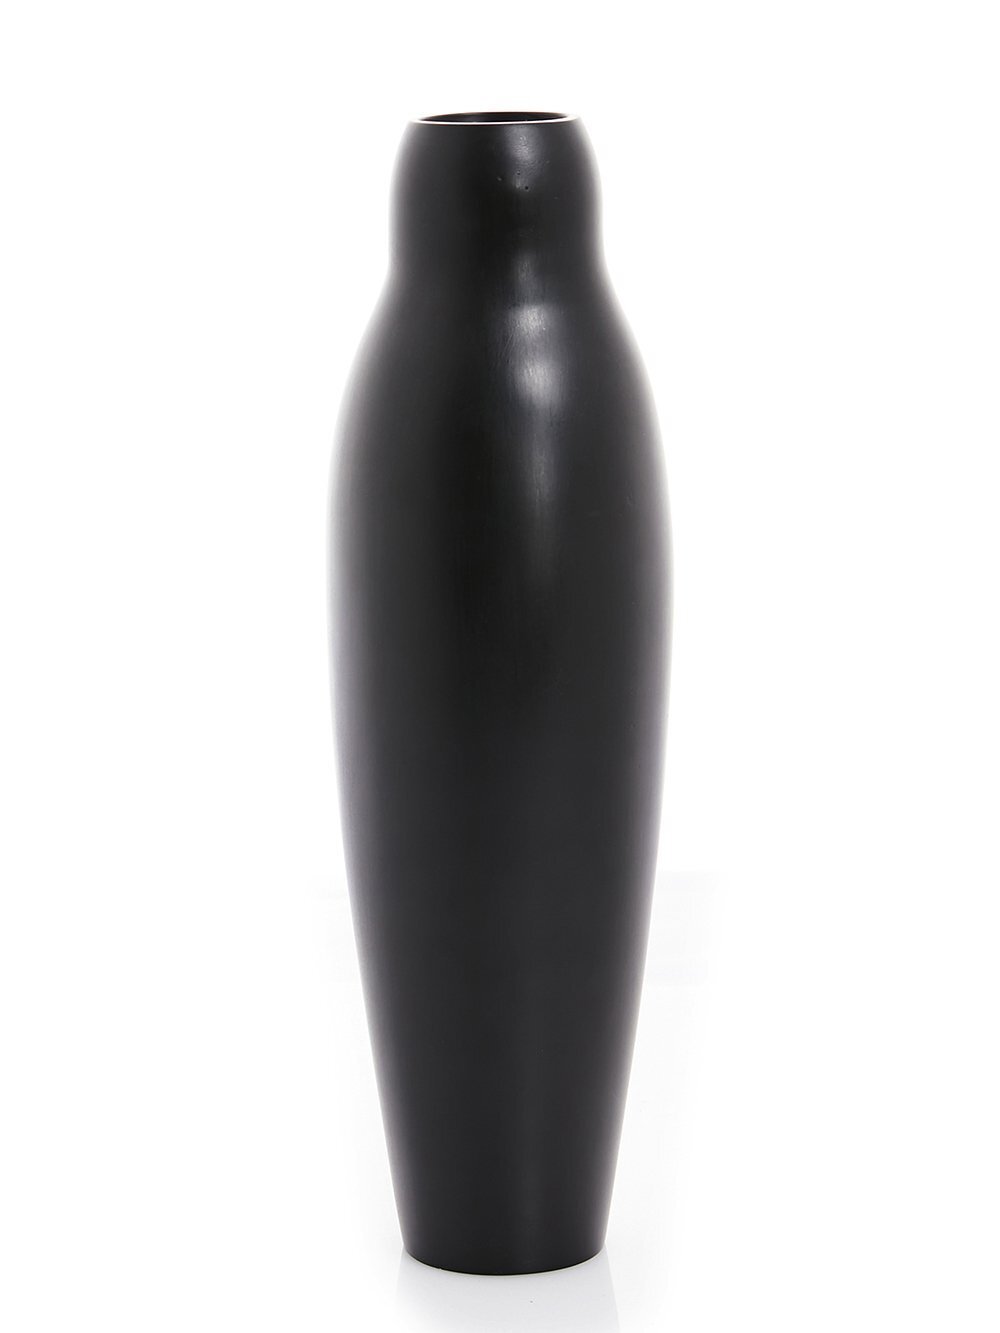 RICK OWENS GOURD VASE IN BLACK BRONZE IS A GOURD SHAPE CONTAINER, FEATURES A ROUND NECK AND POLISHED SURFACE.